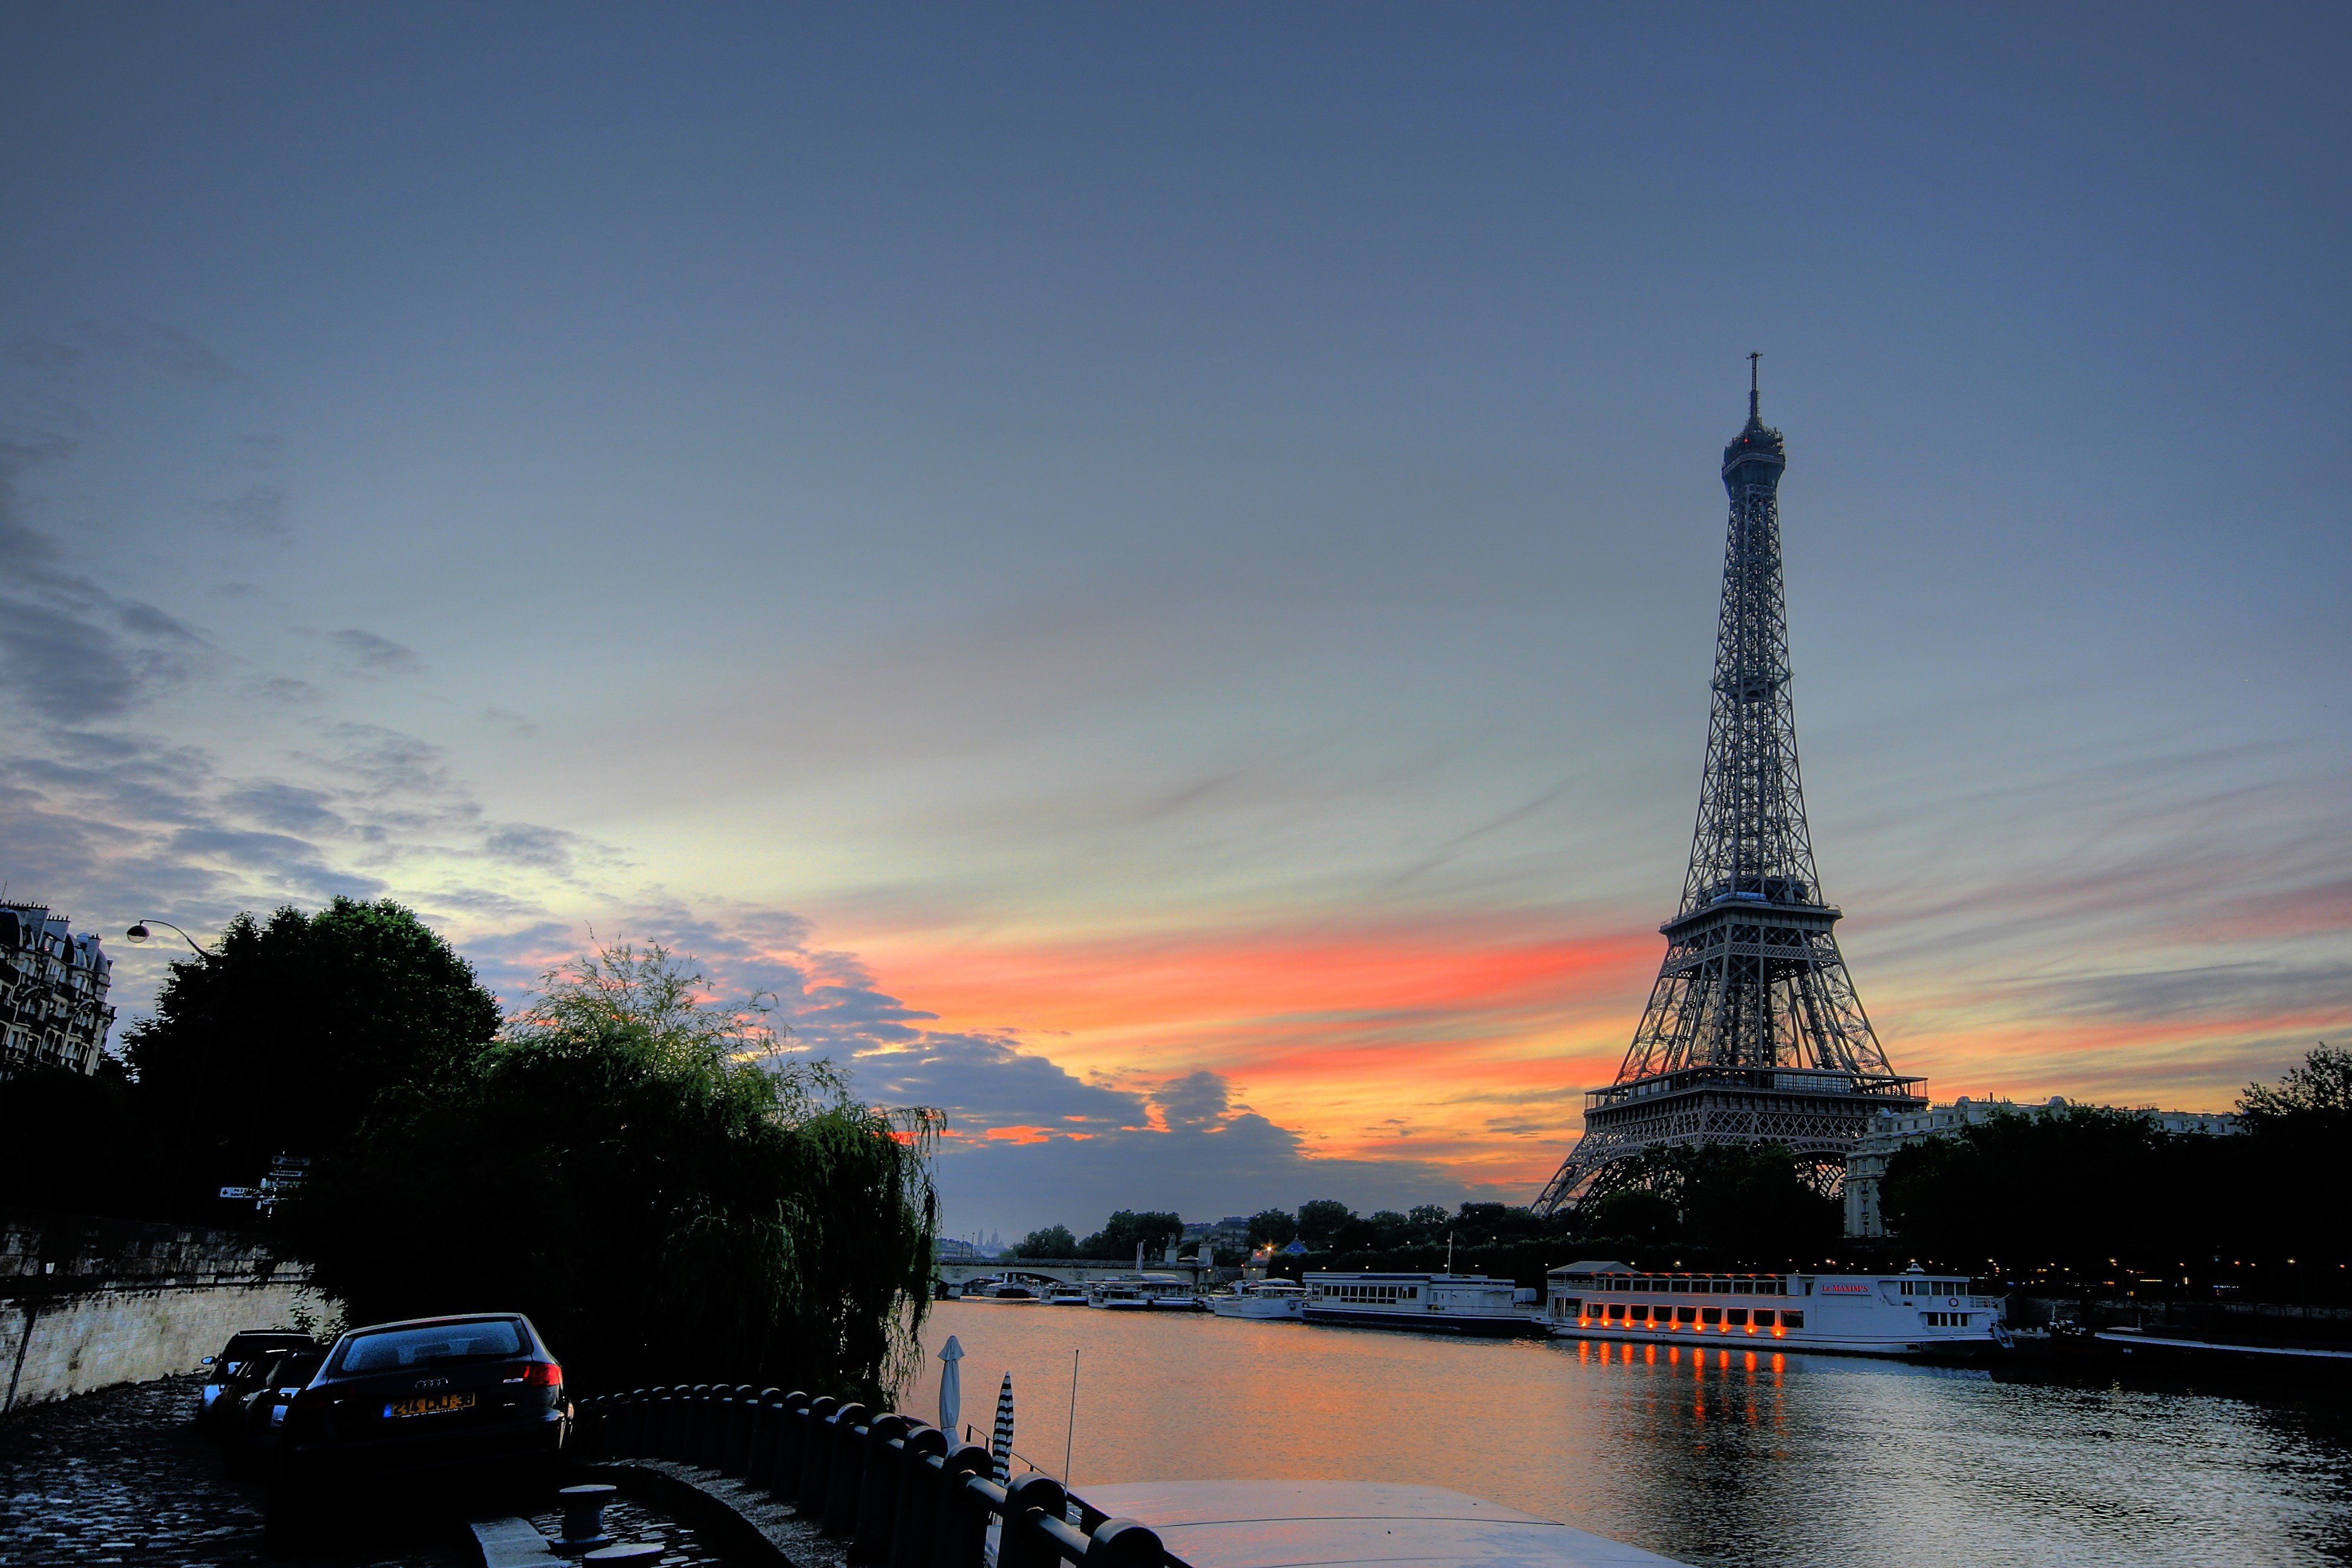 A car is parked next to a river with the Eiffel Tower in the background. - France